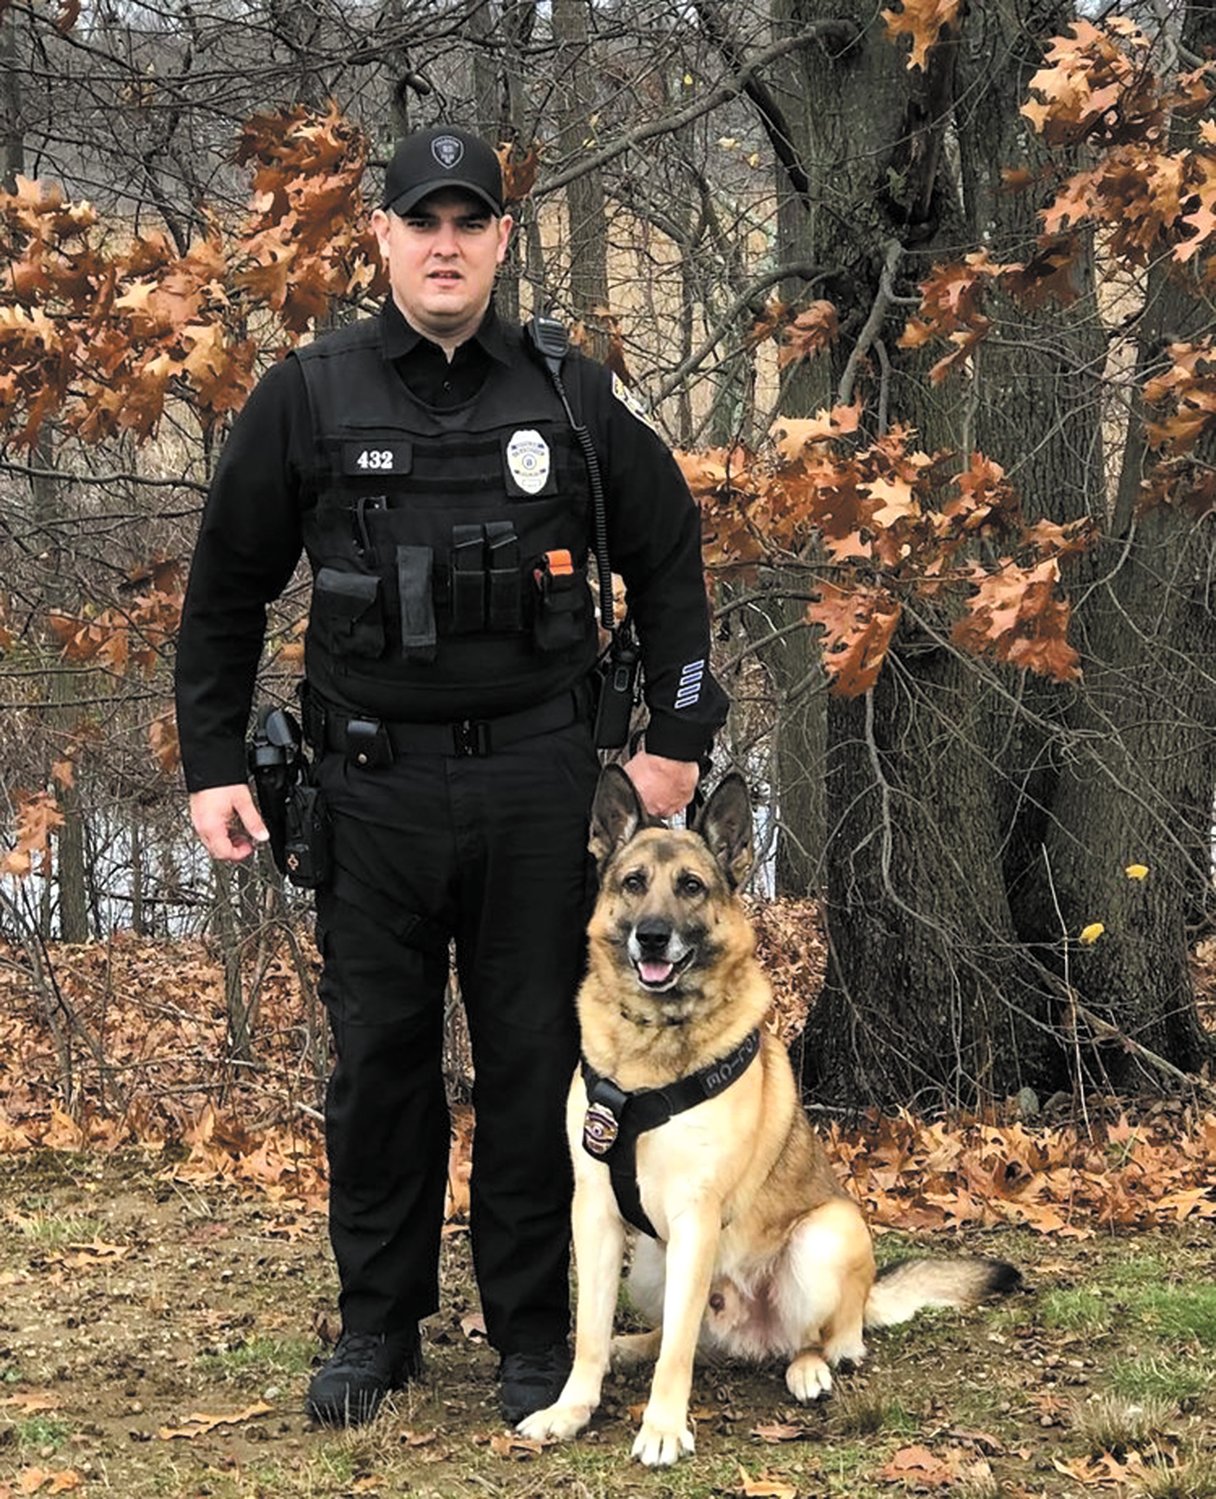 PARTNERS: 
K-9 Lex and 
Officer Bagshaw worked together since 2015. Lex retired from duty in April of 2022.